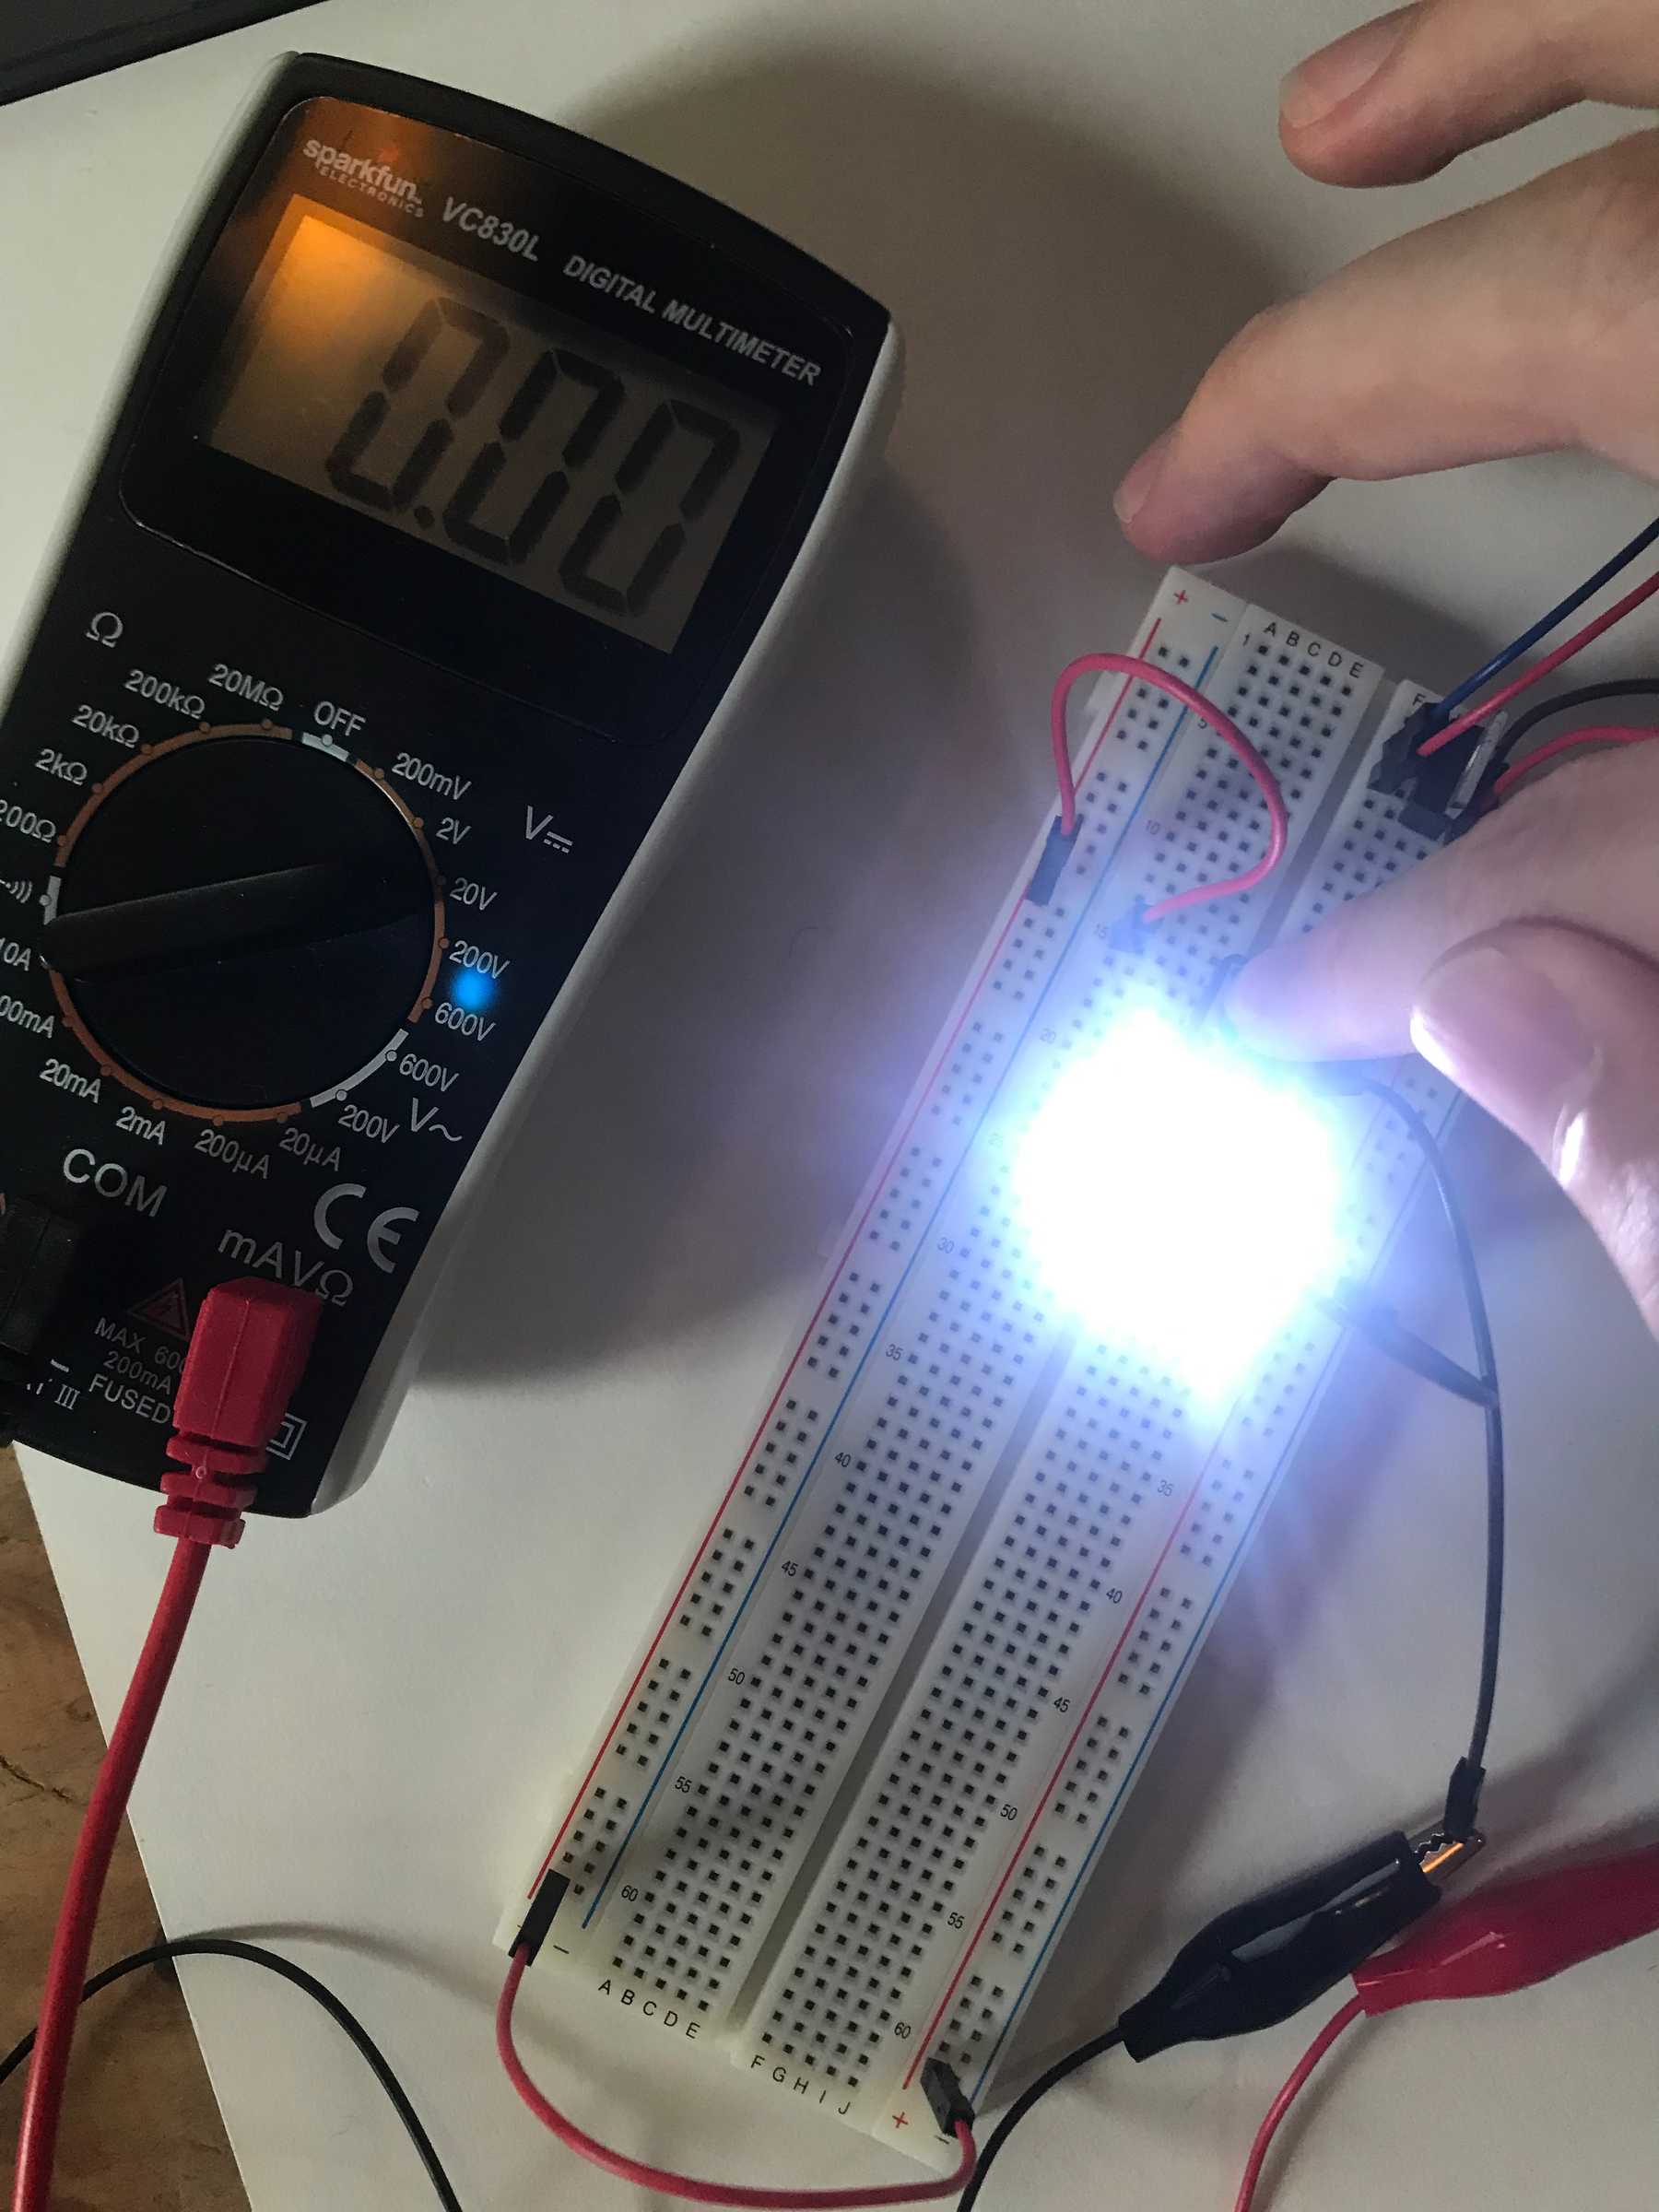 Measuring the voltage drop across the pressed button